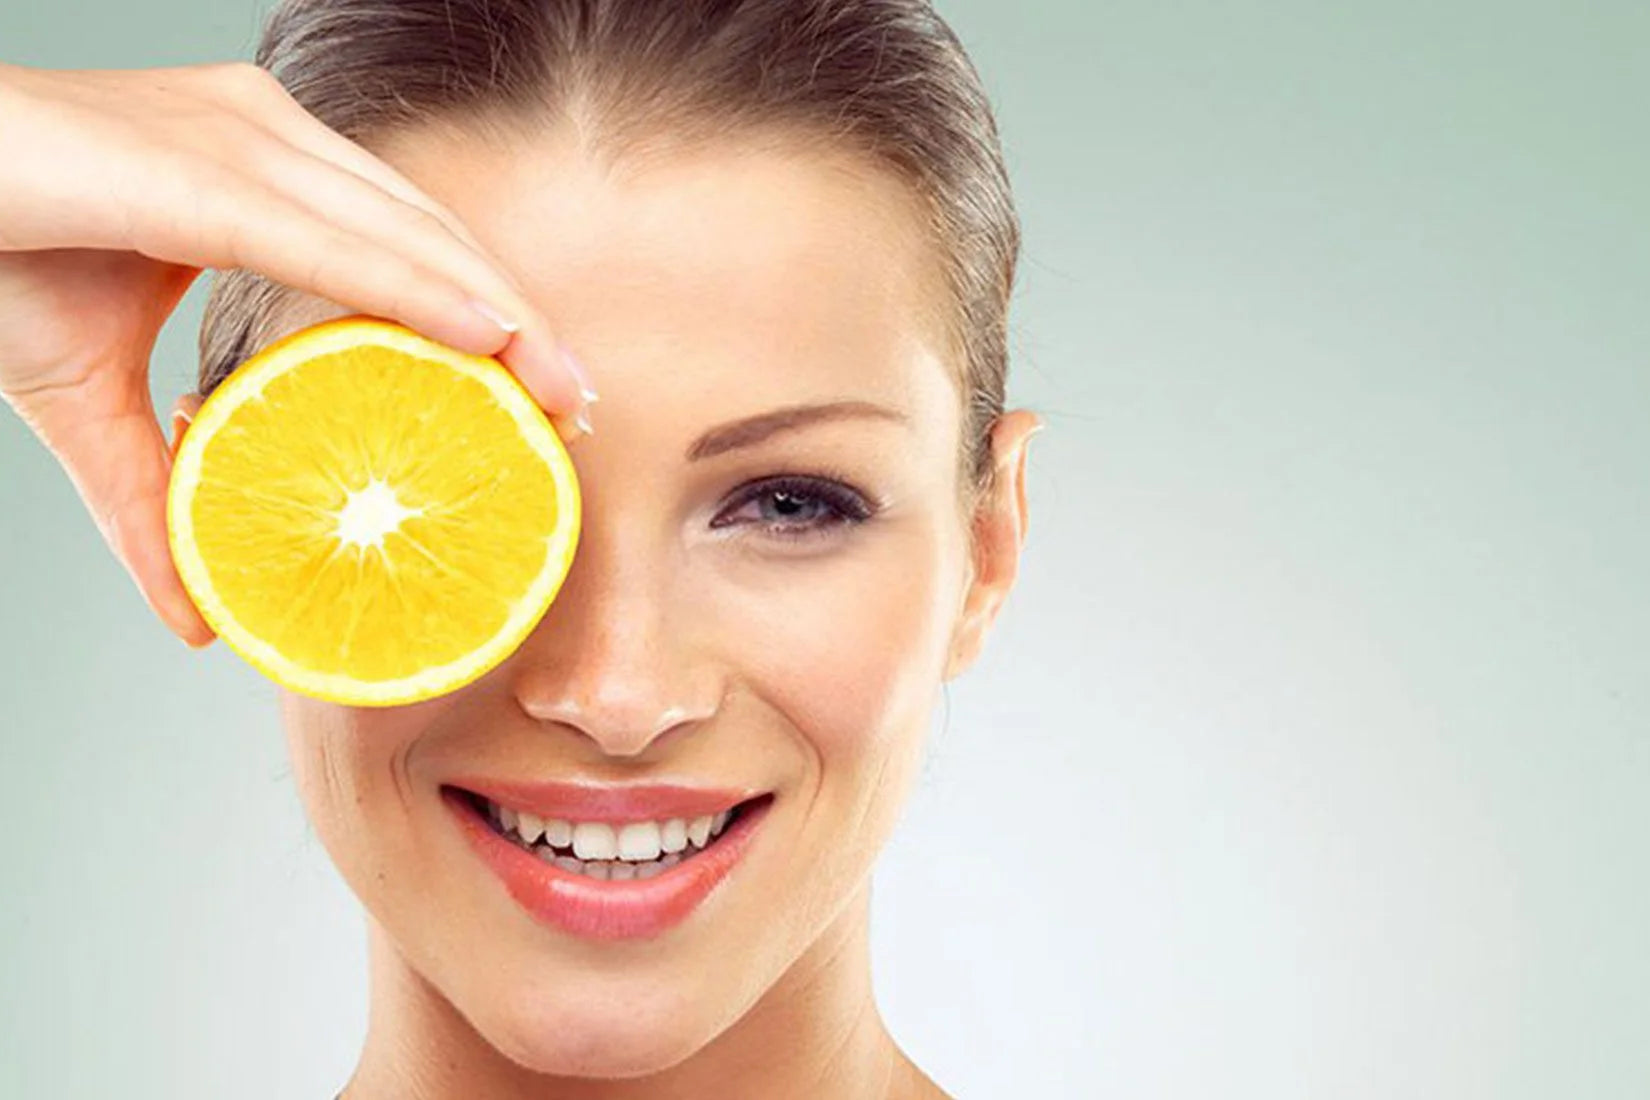 How Does Vitamin C Benefit The Skin?